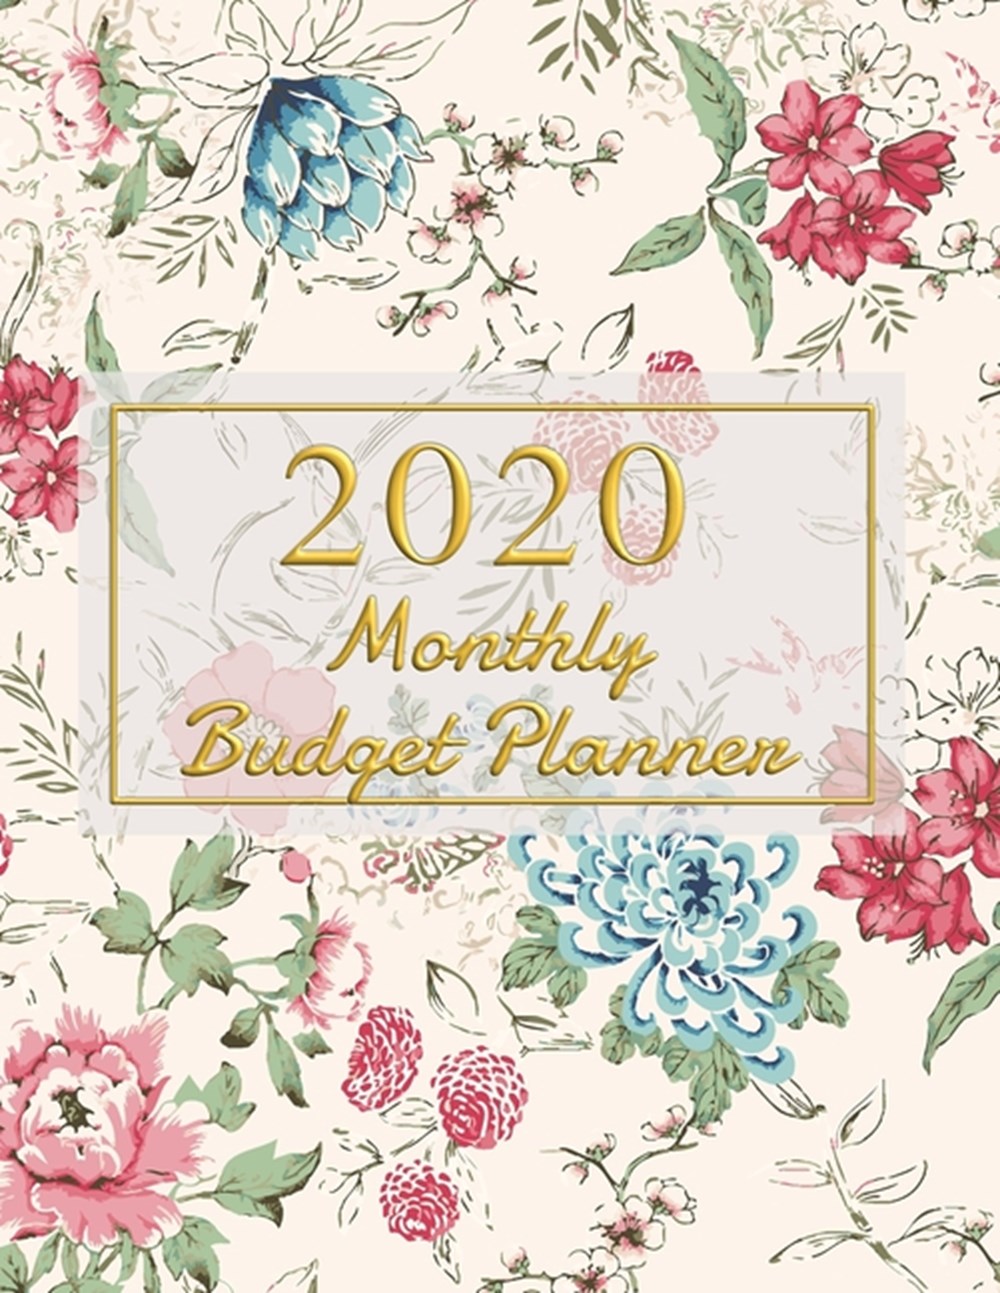 2020 Monthly Budget Planner Expense Finance Budget book By A Year Monthly Weekly & Daily calendar Bi